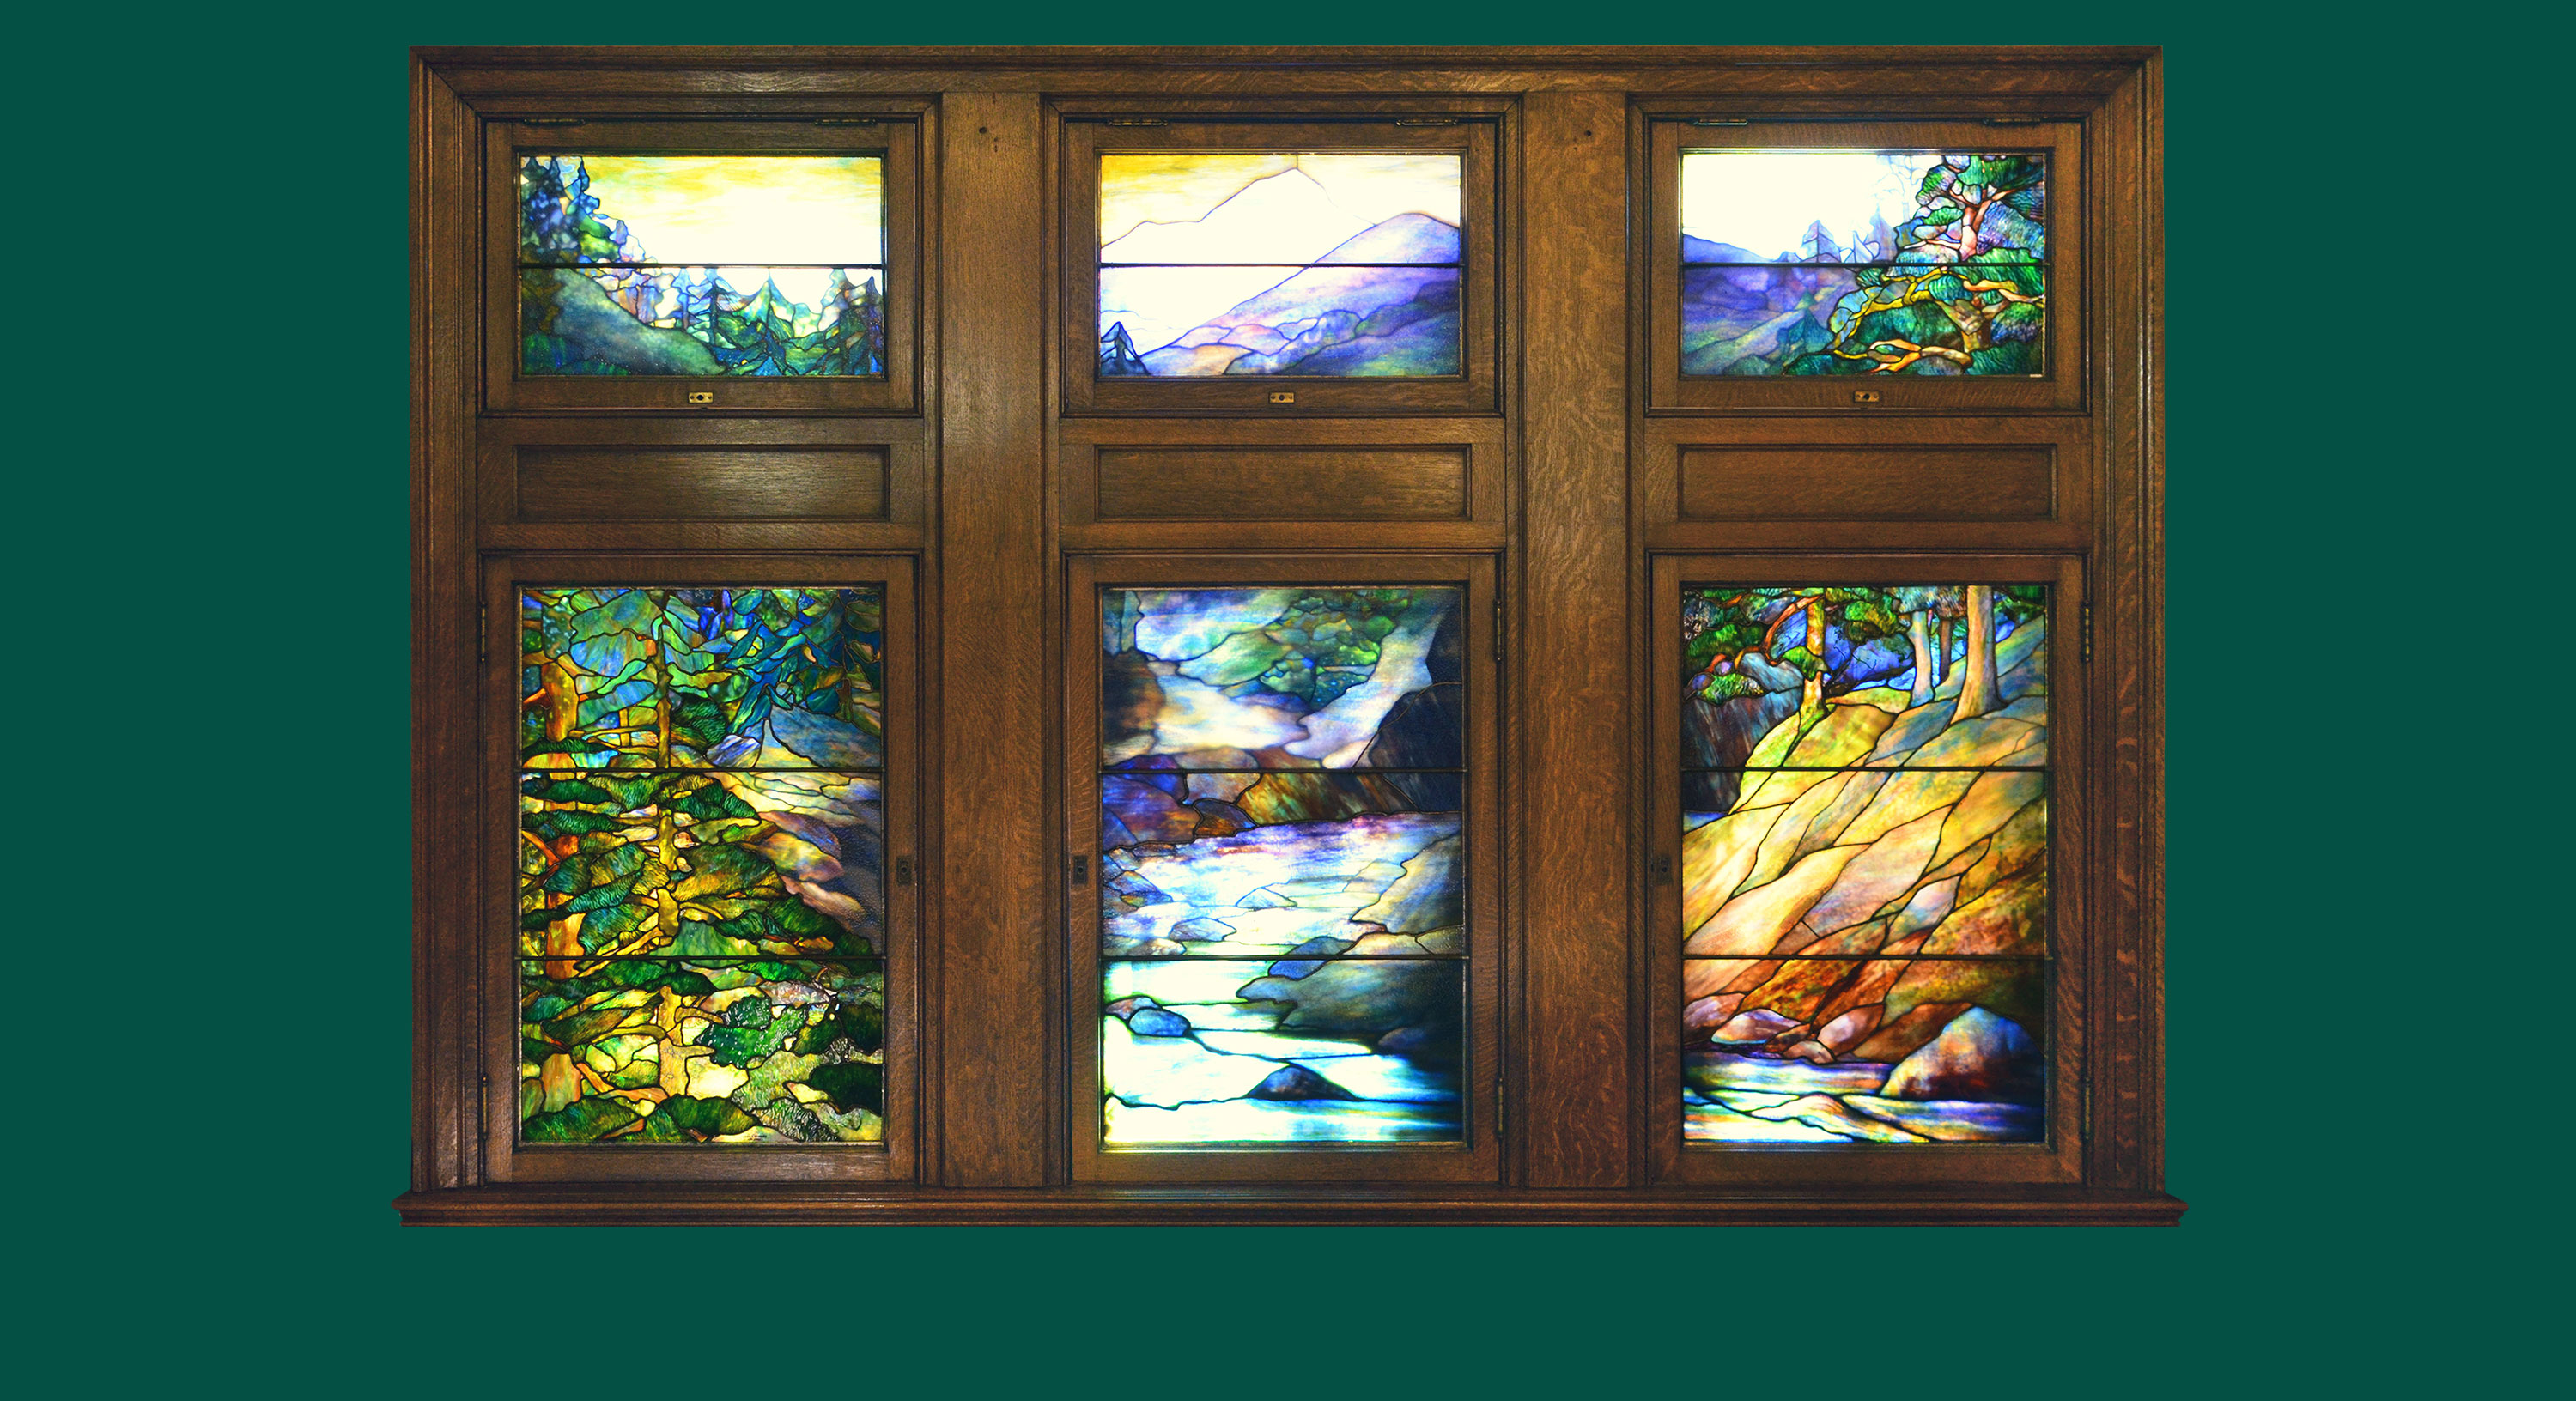 Tiffany Studios stained glass